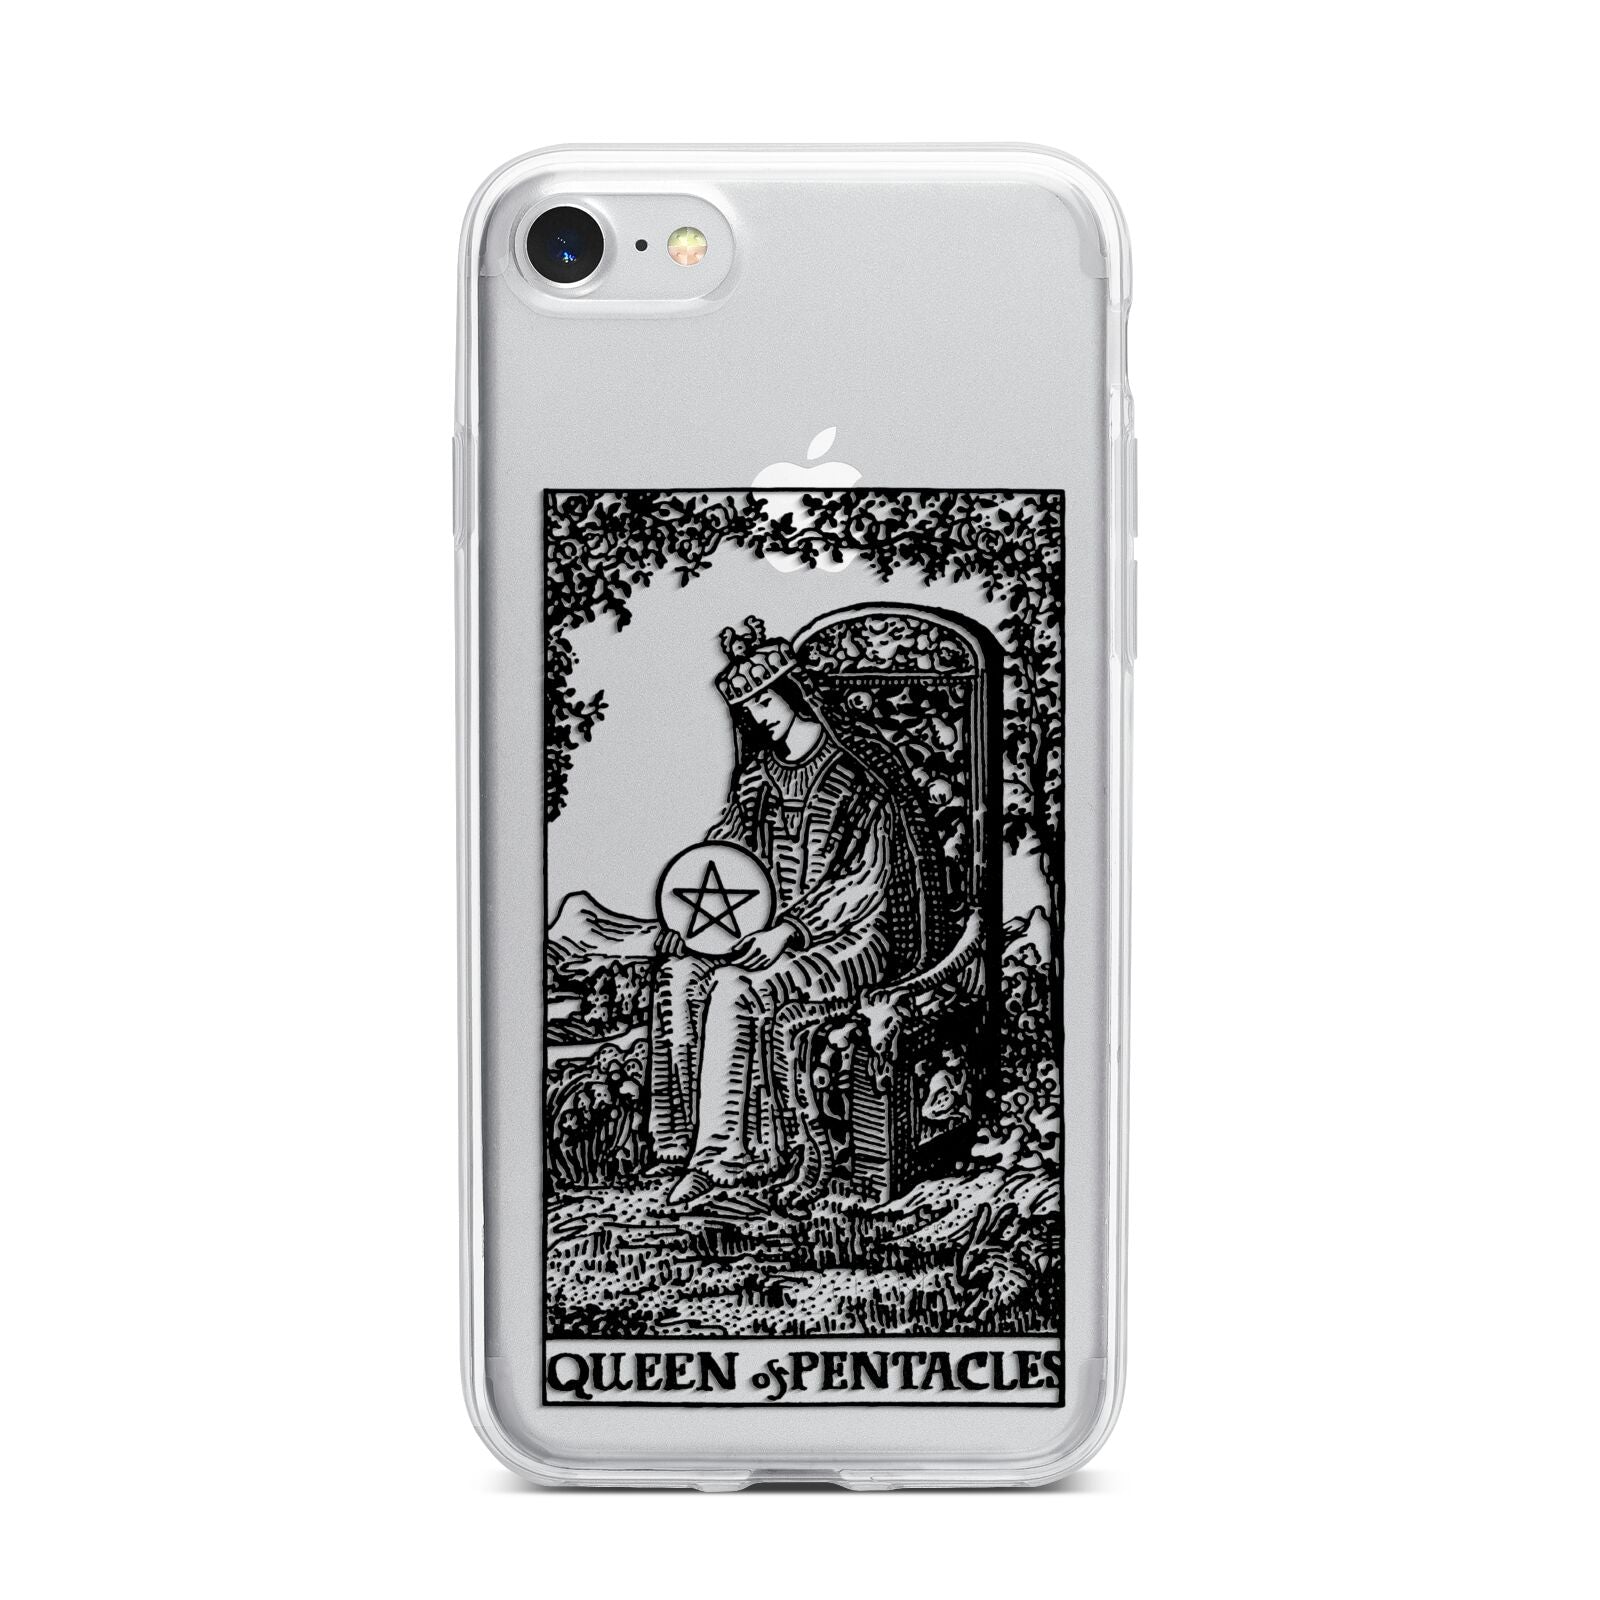 Queen of Pentacles Monochrome iPhone 7 Bumper Case on Silver iPhone